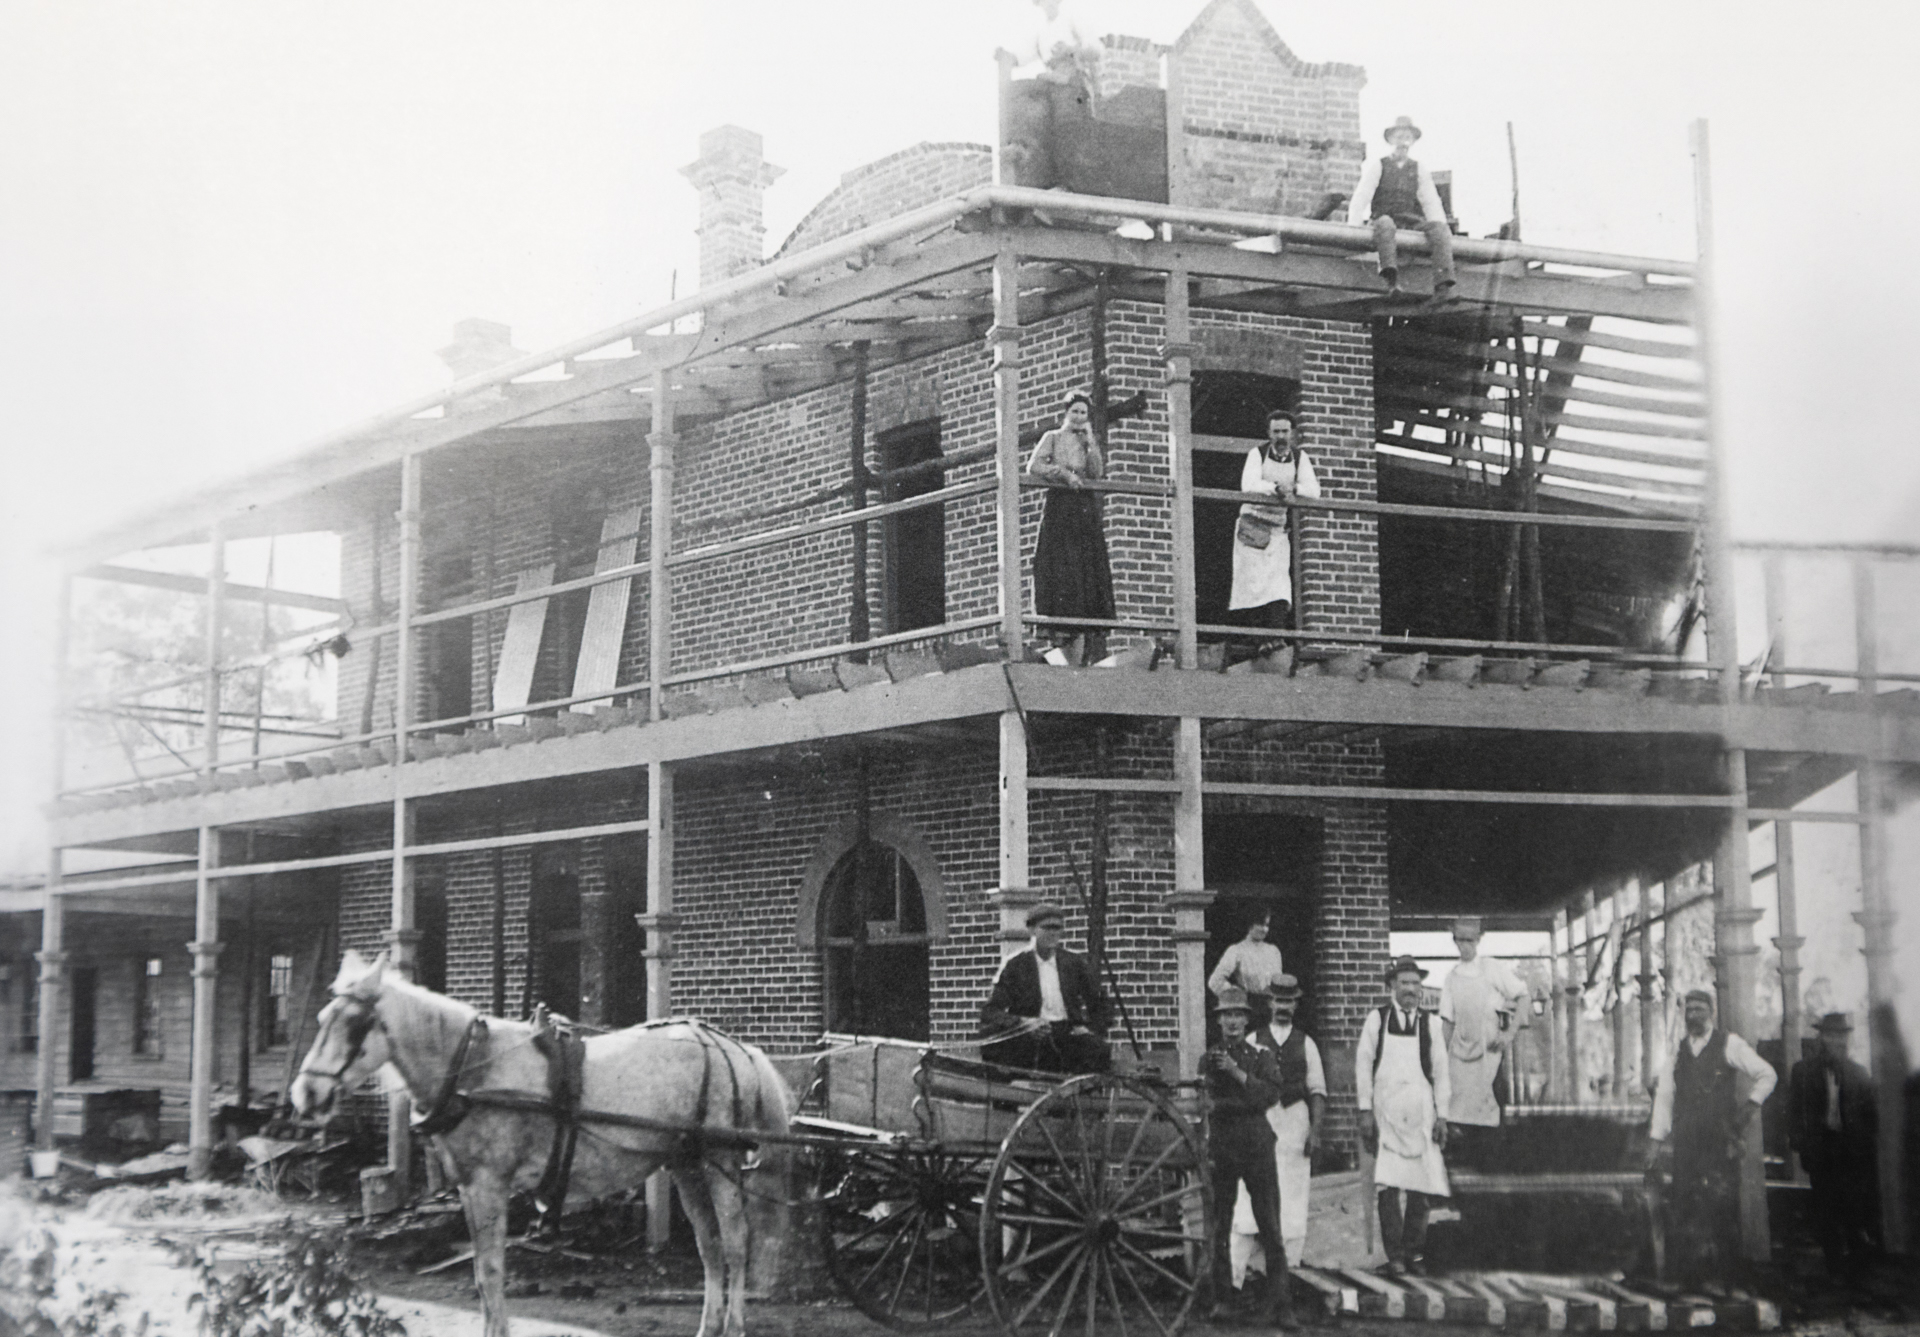 Wallendbeen's rich history recorded in historic photographs